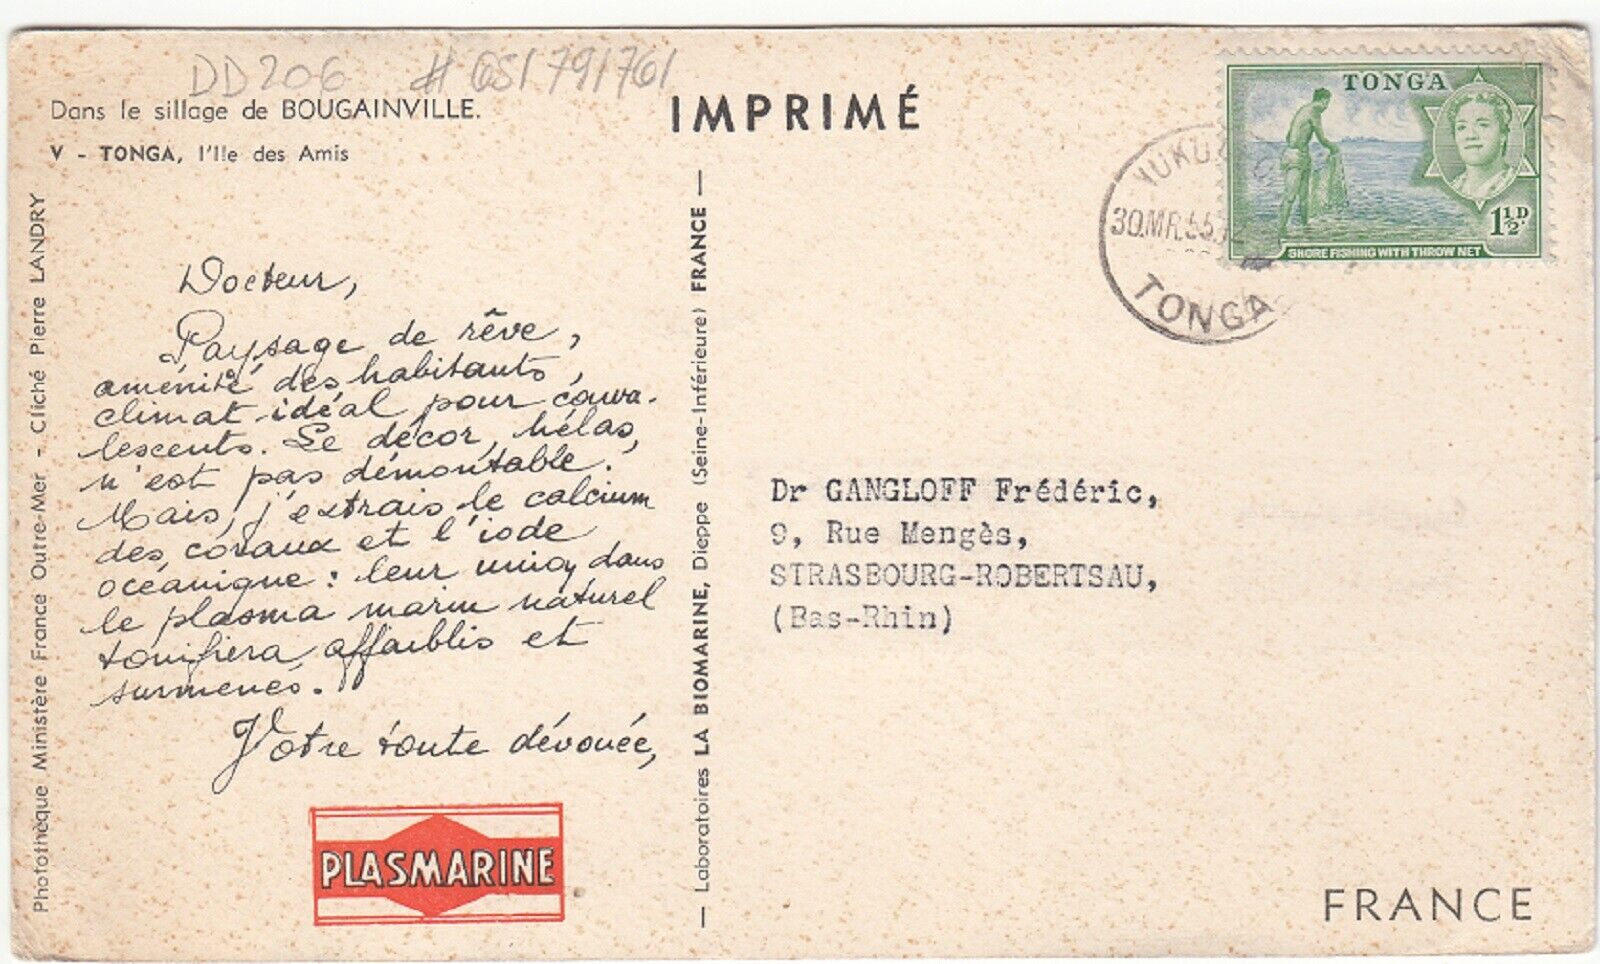 TONGA cover postmarked 30 March 1955 to France - Dear Doctor pos